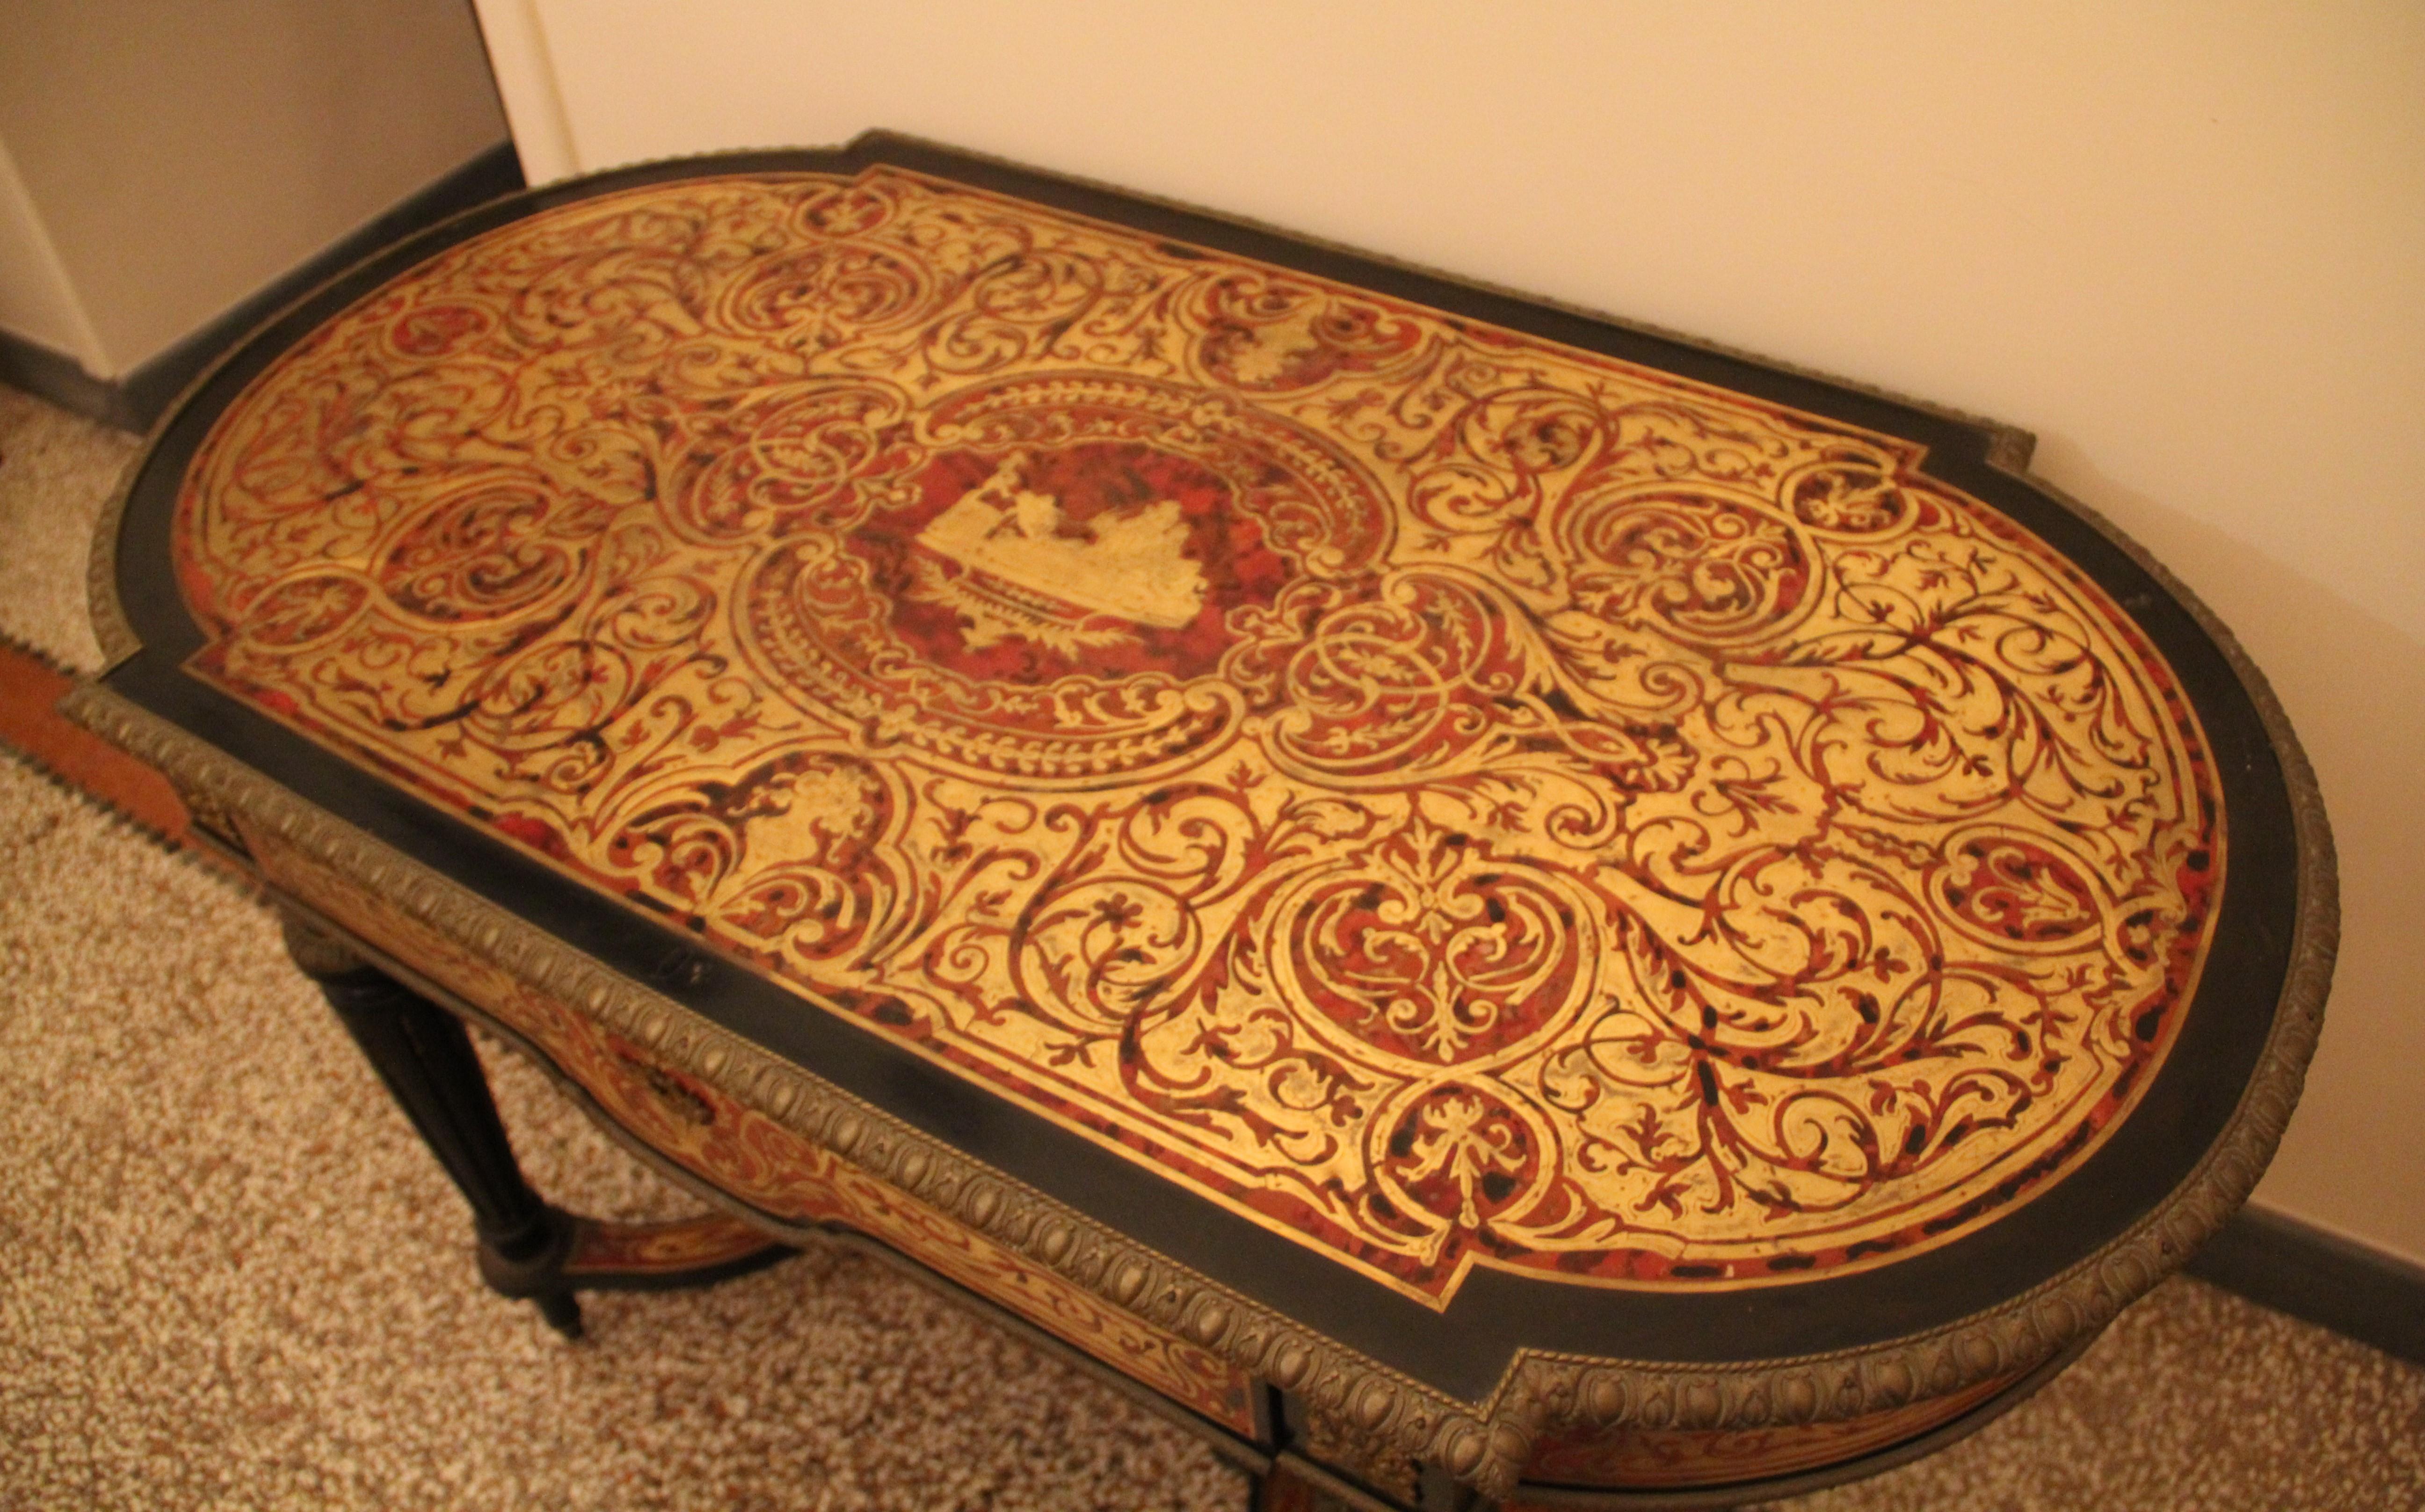 Baroque Revival Gilt Bronze-Mounted “Boulle” Marquetry Centre Table, Late 19th Century For Sale